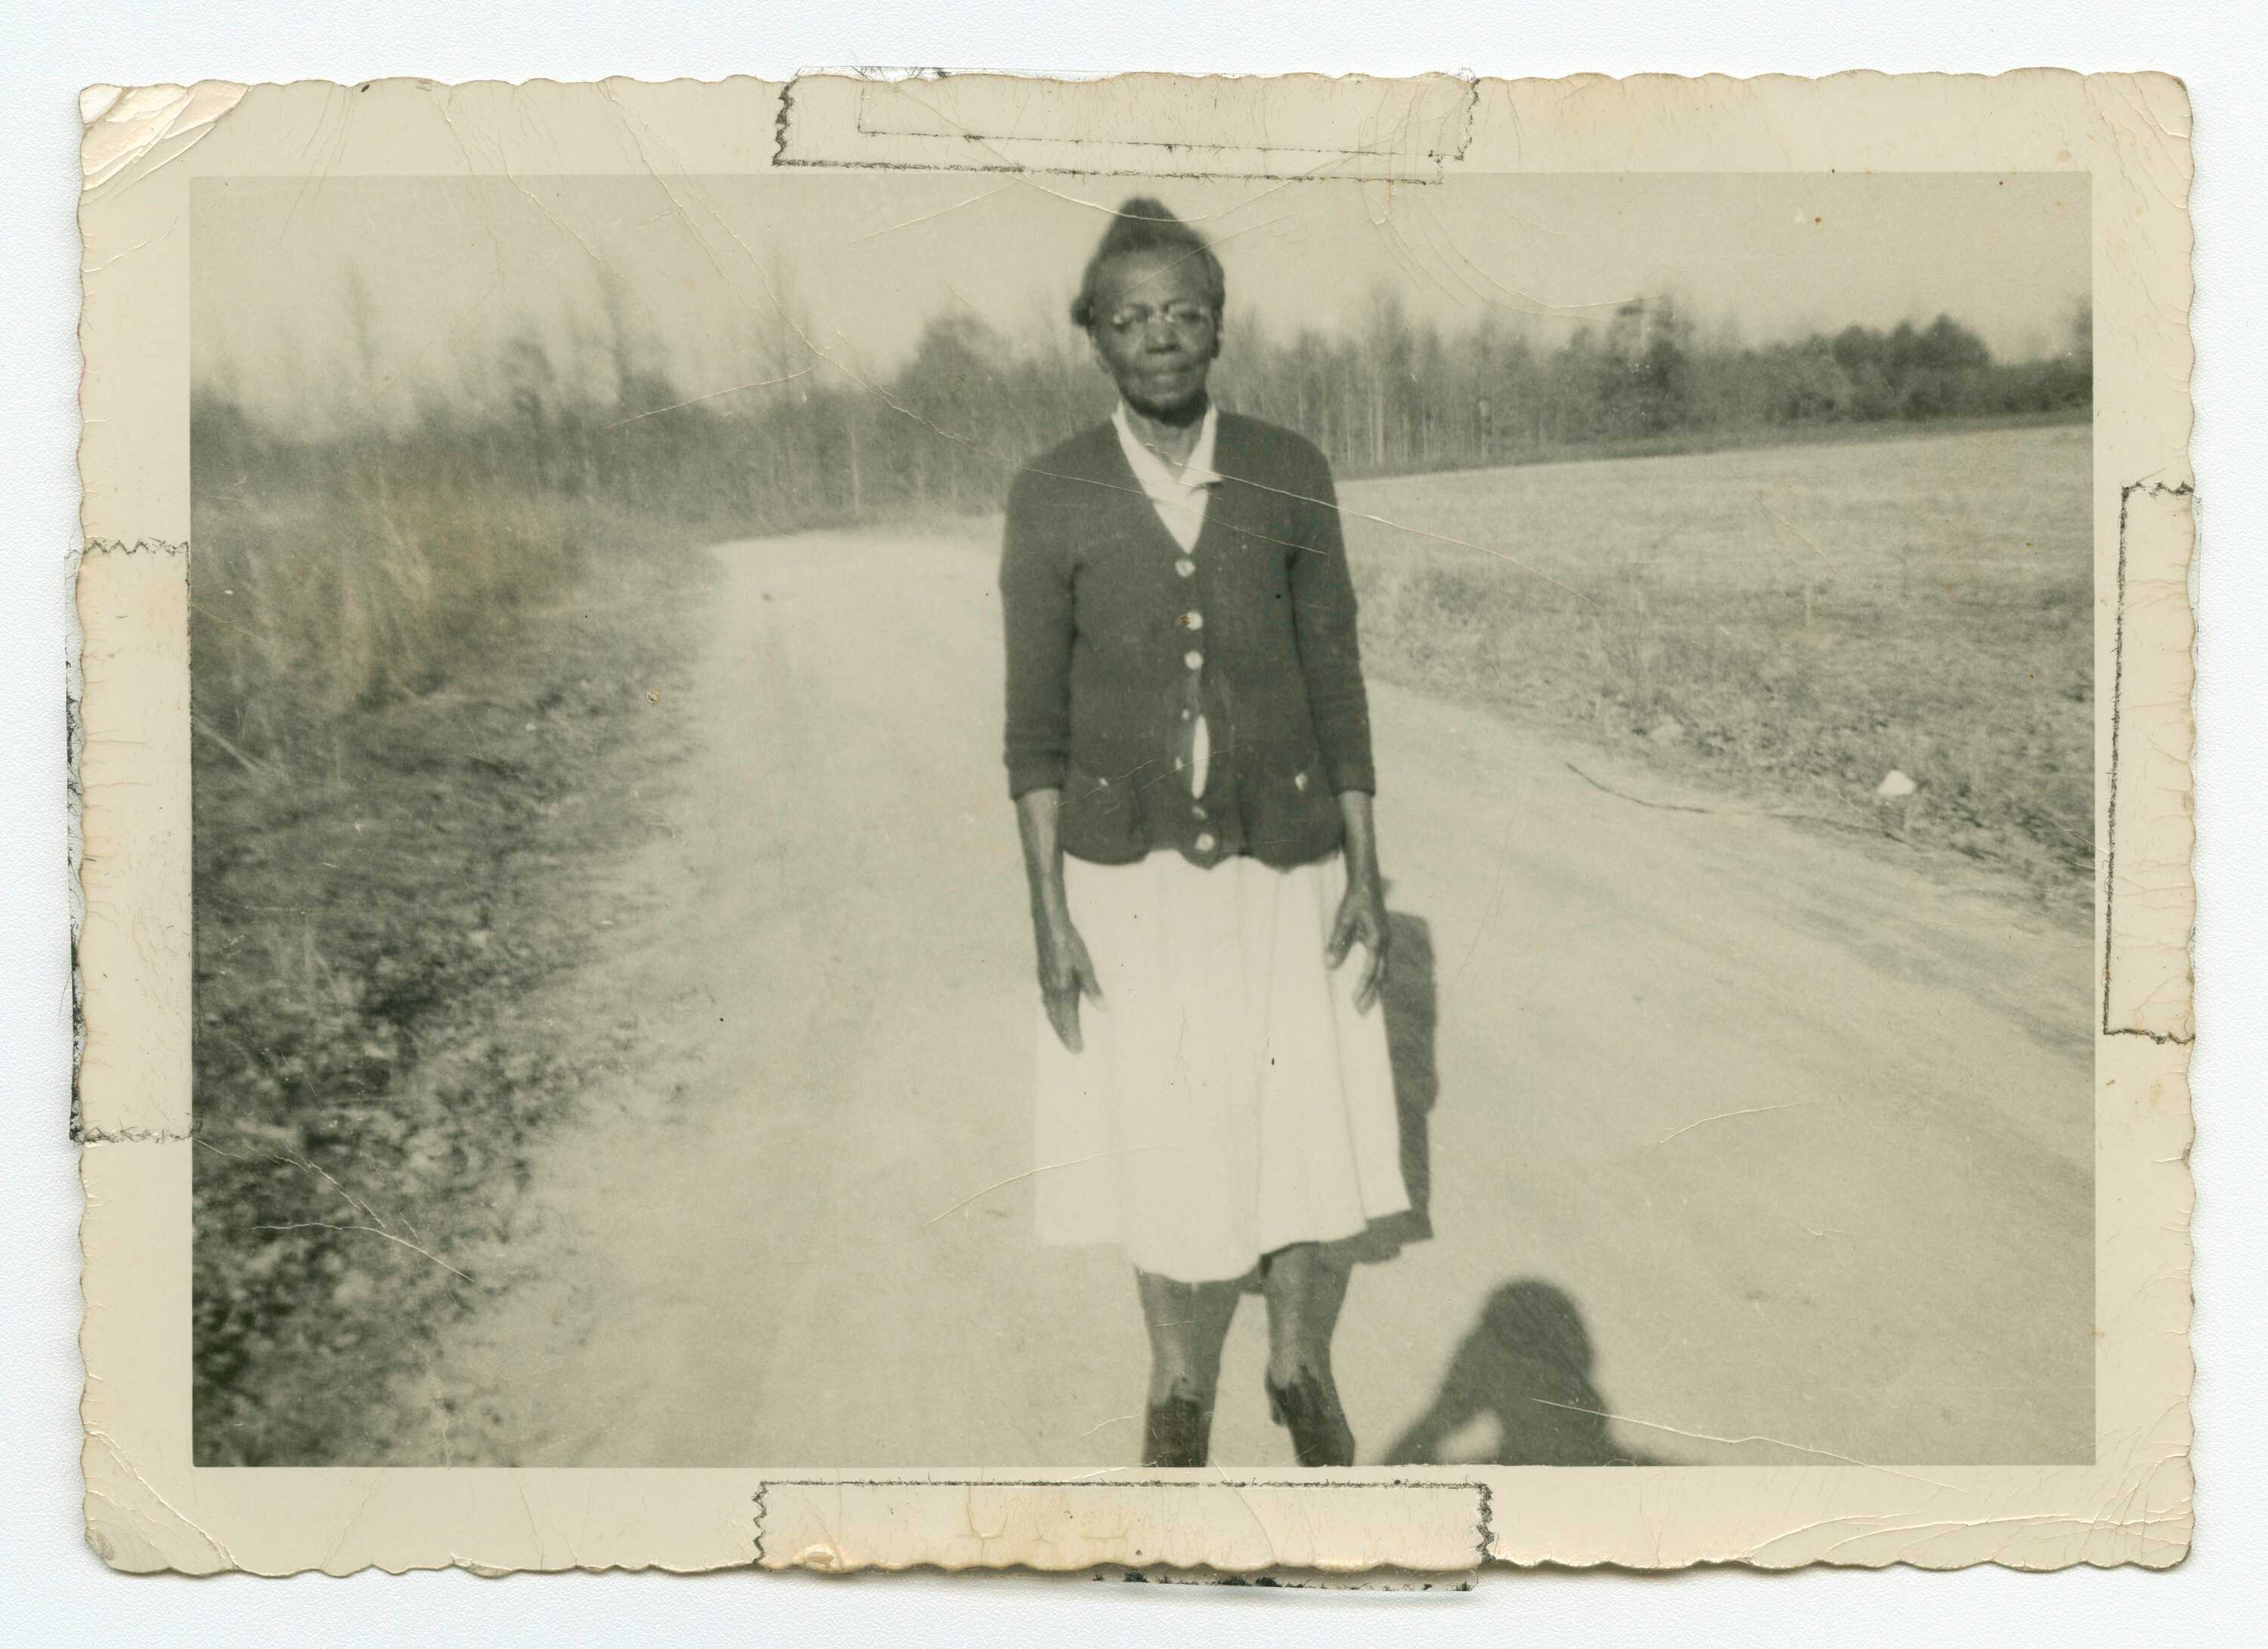 A black-and-white photograph of third-generation midwife Susie Carey, standing on a dirt road in a rural landscape.